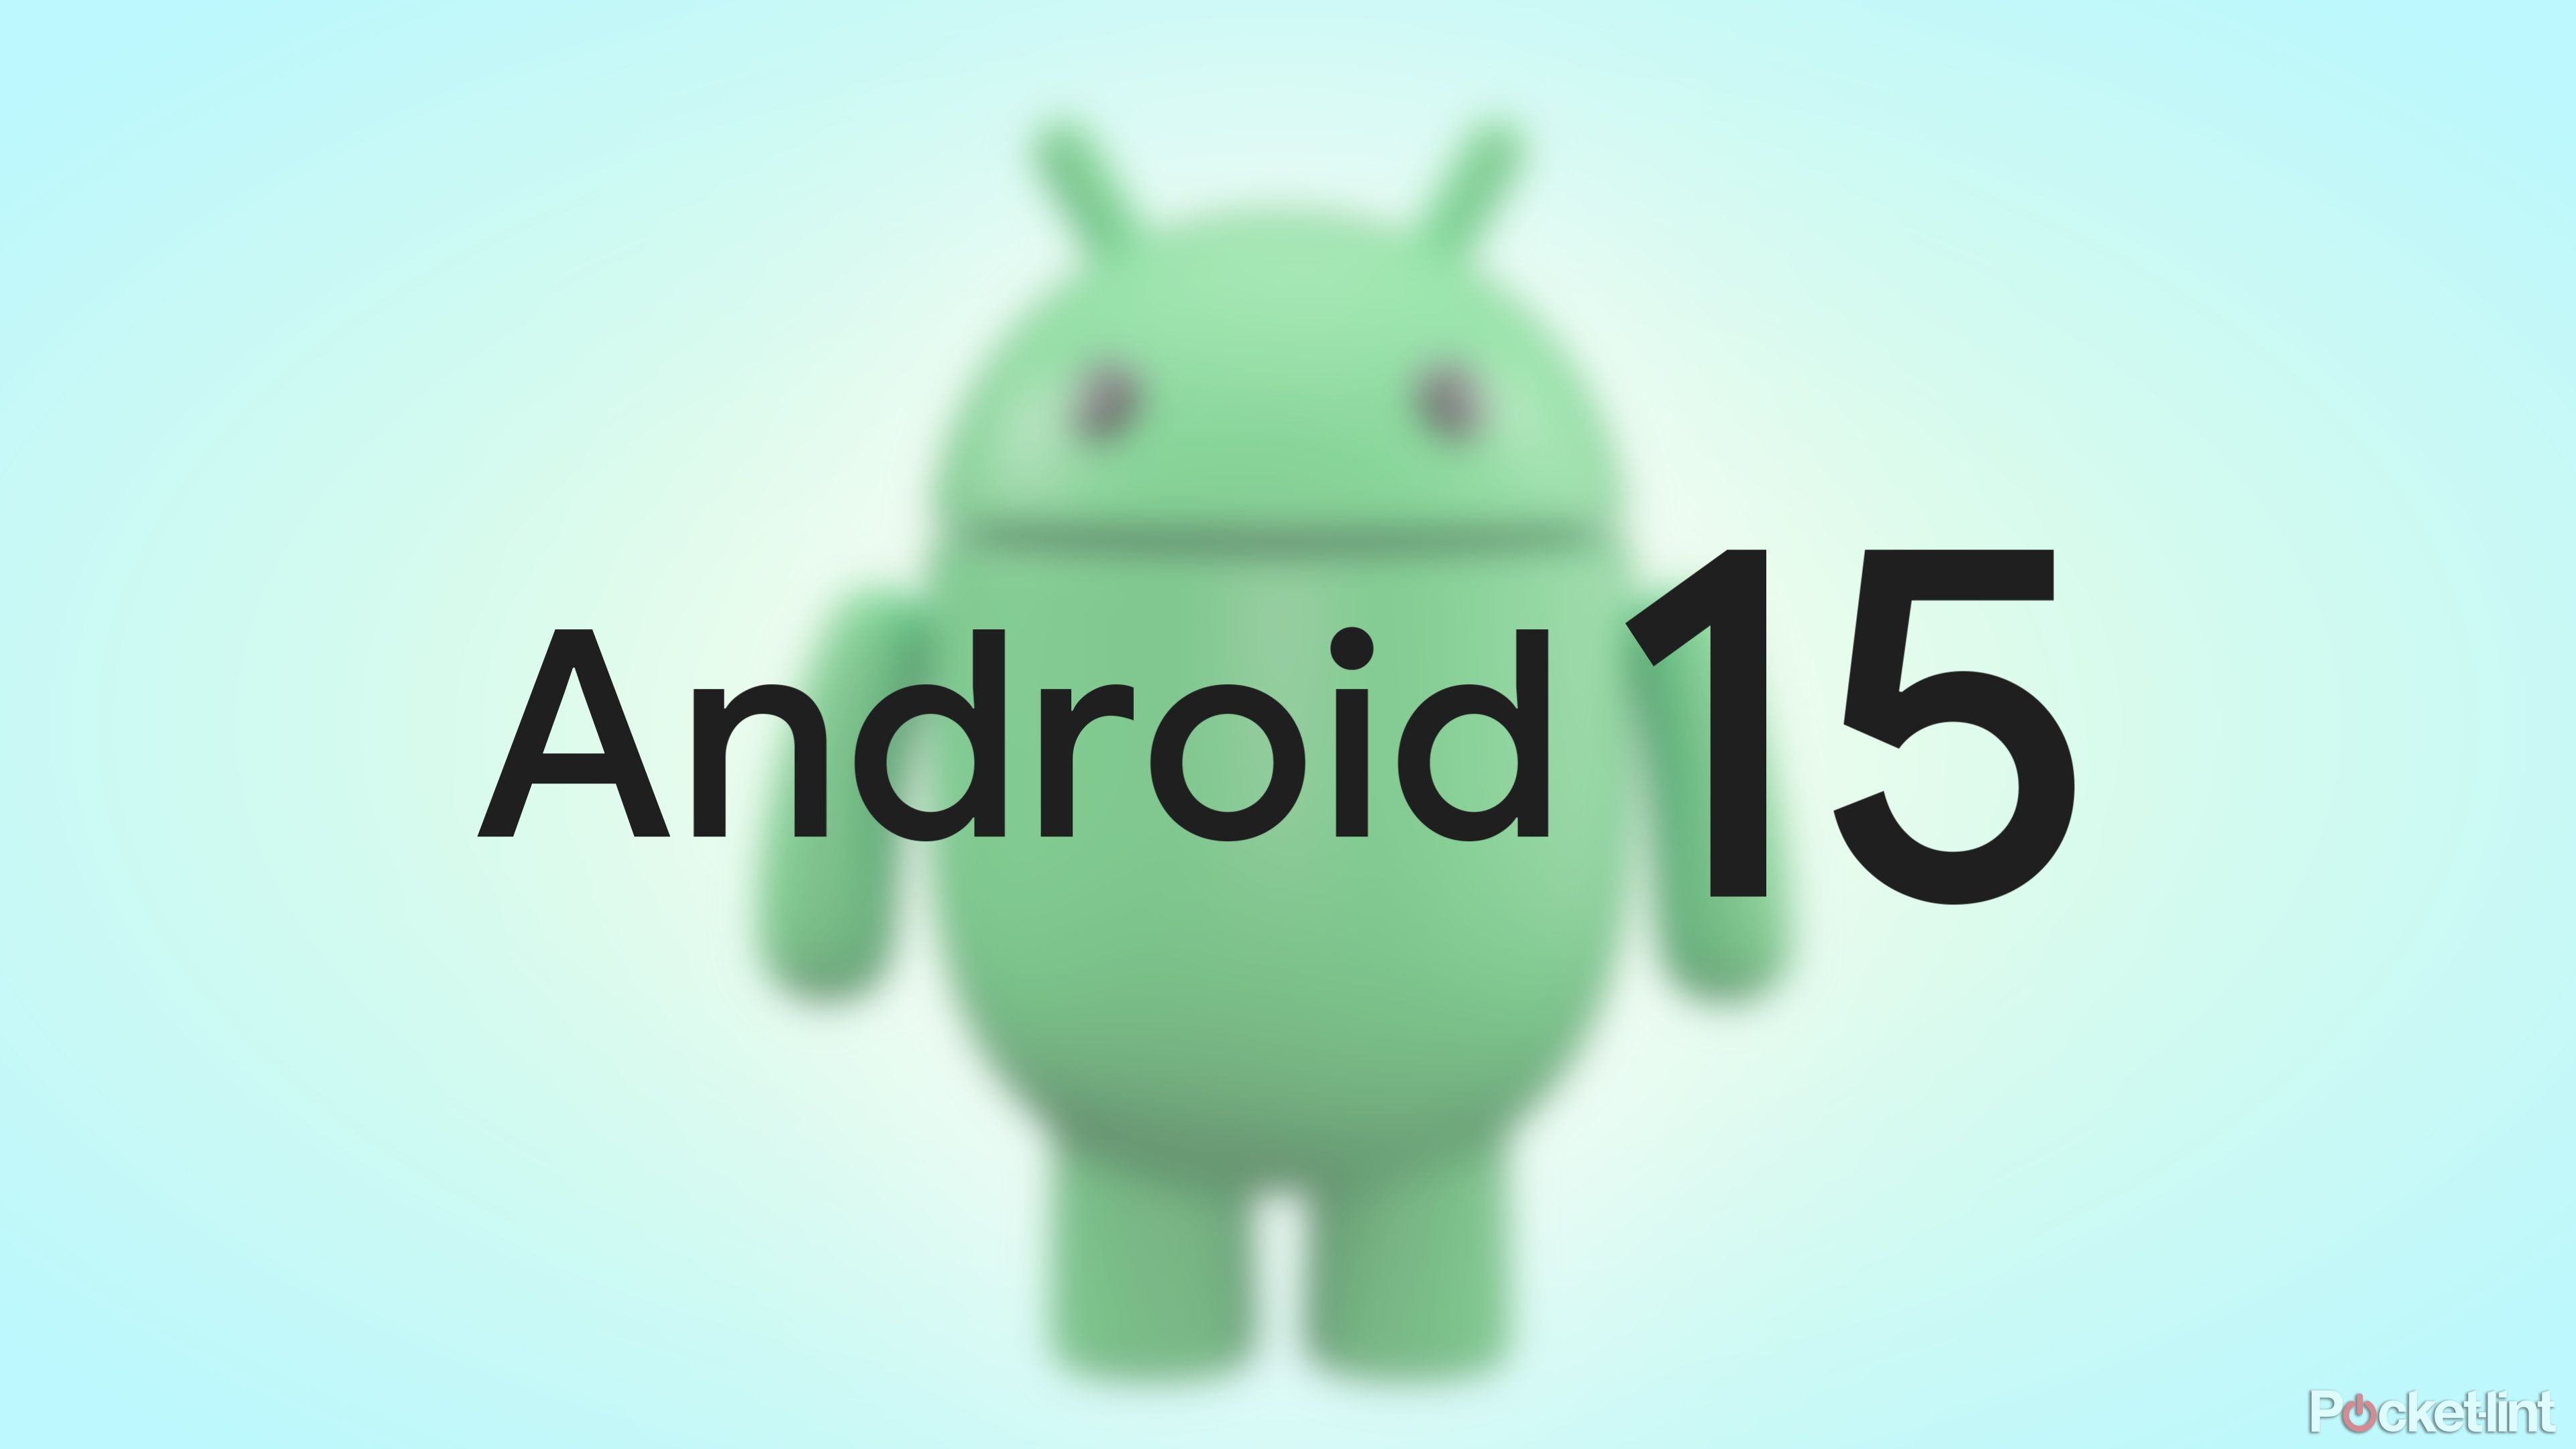 5 features I hope Google brings to Android 15